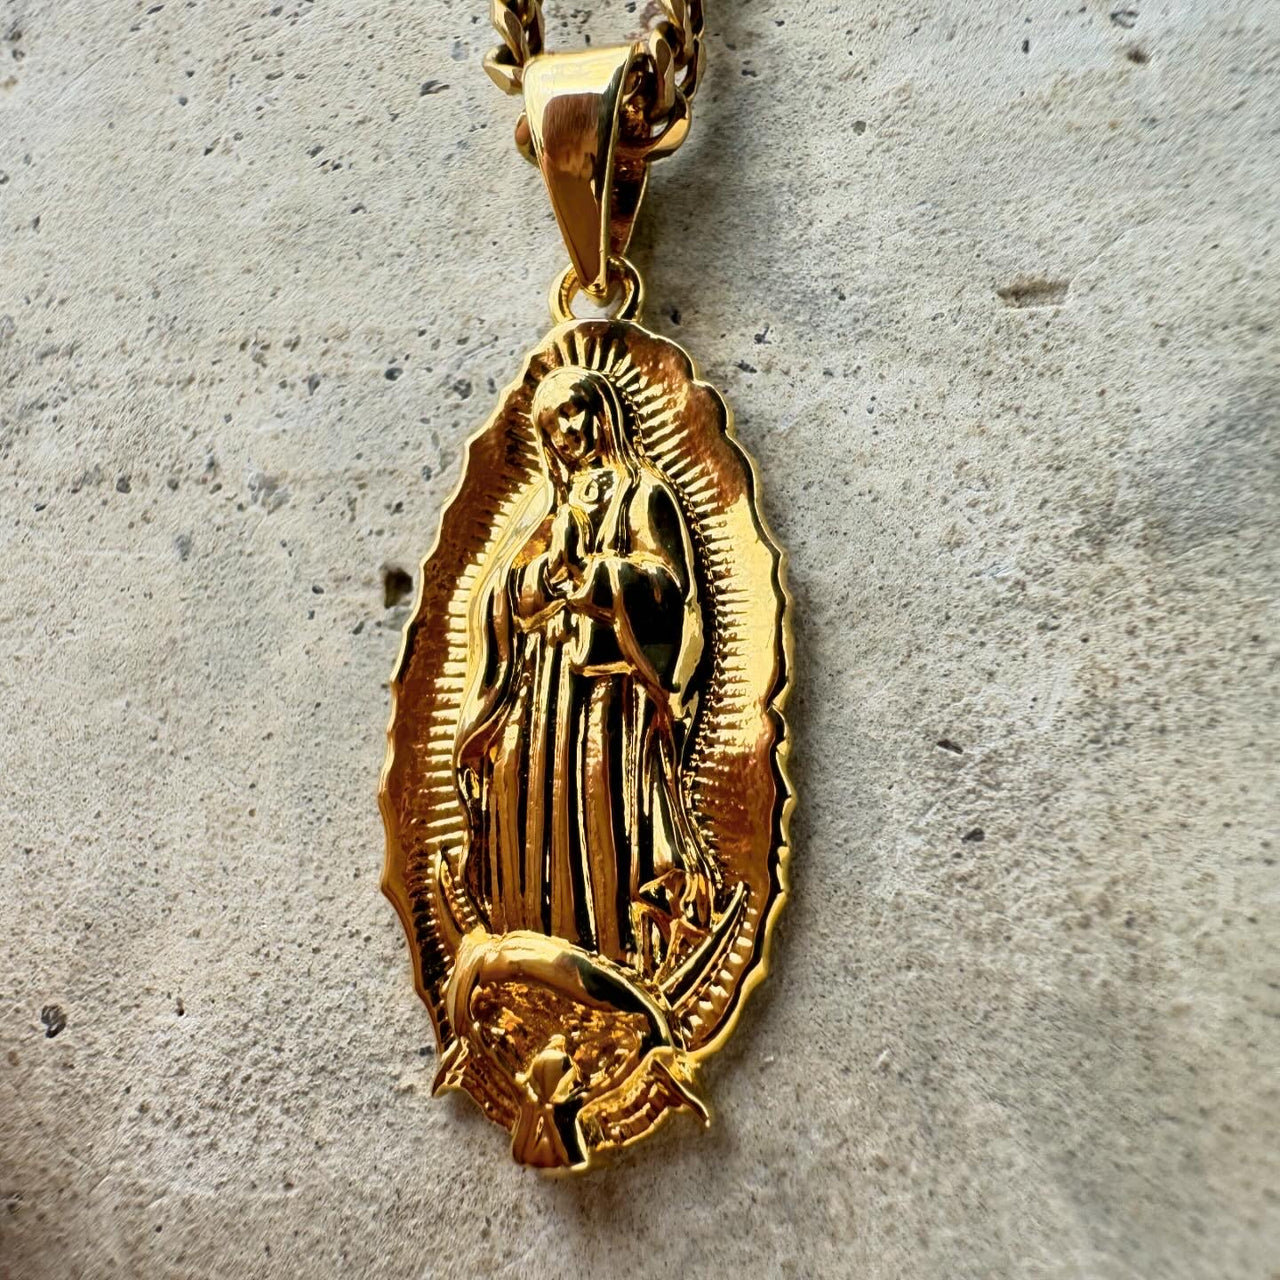 40% off ADD ON - LADY GUADALUPE PENDANT (GOLD)